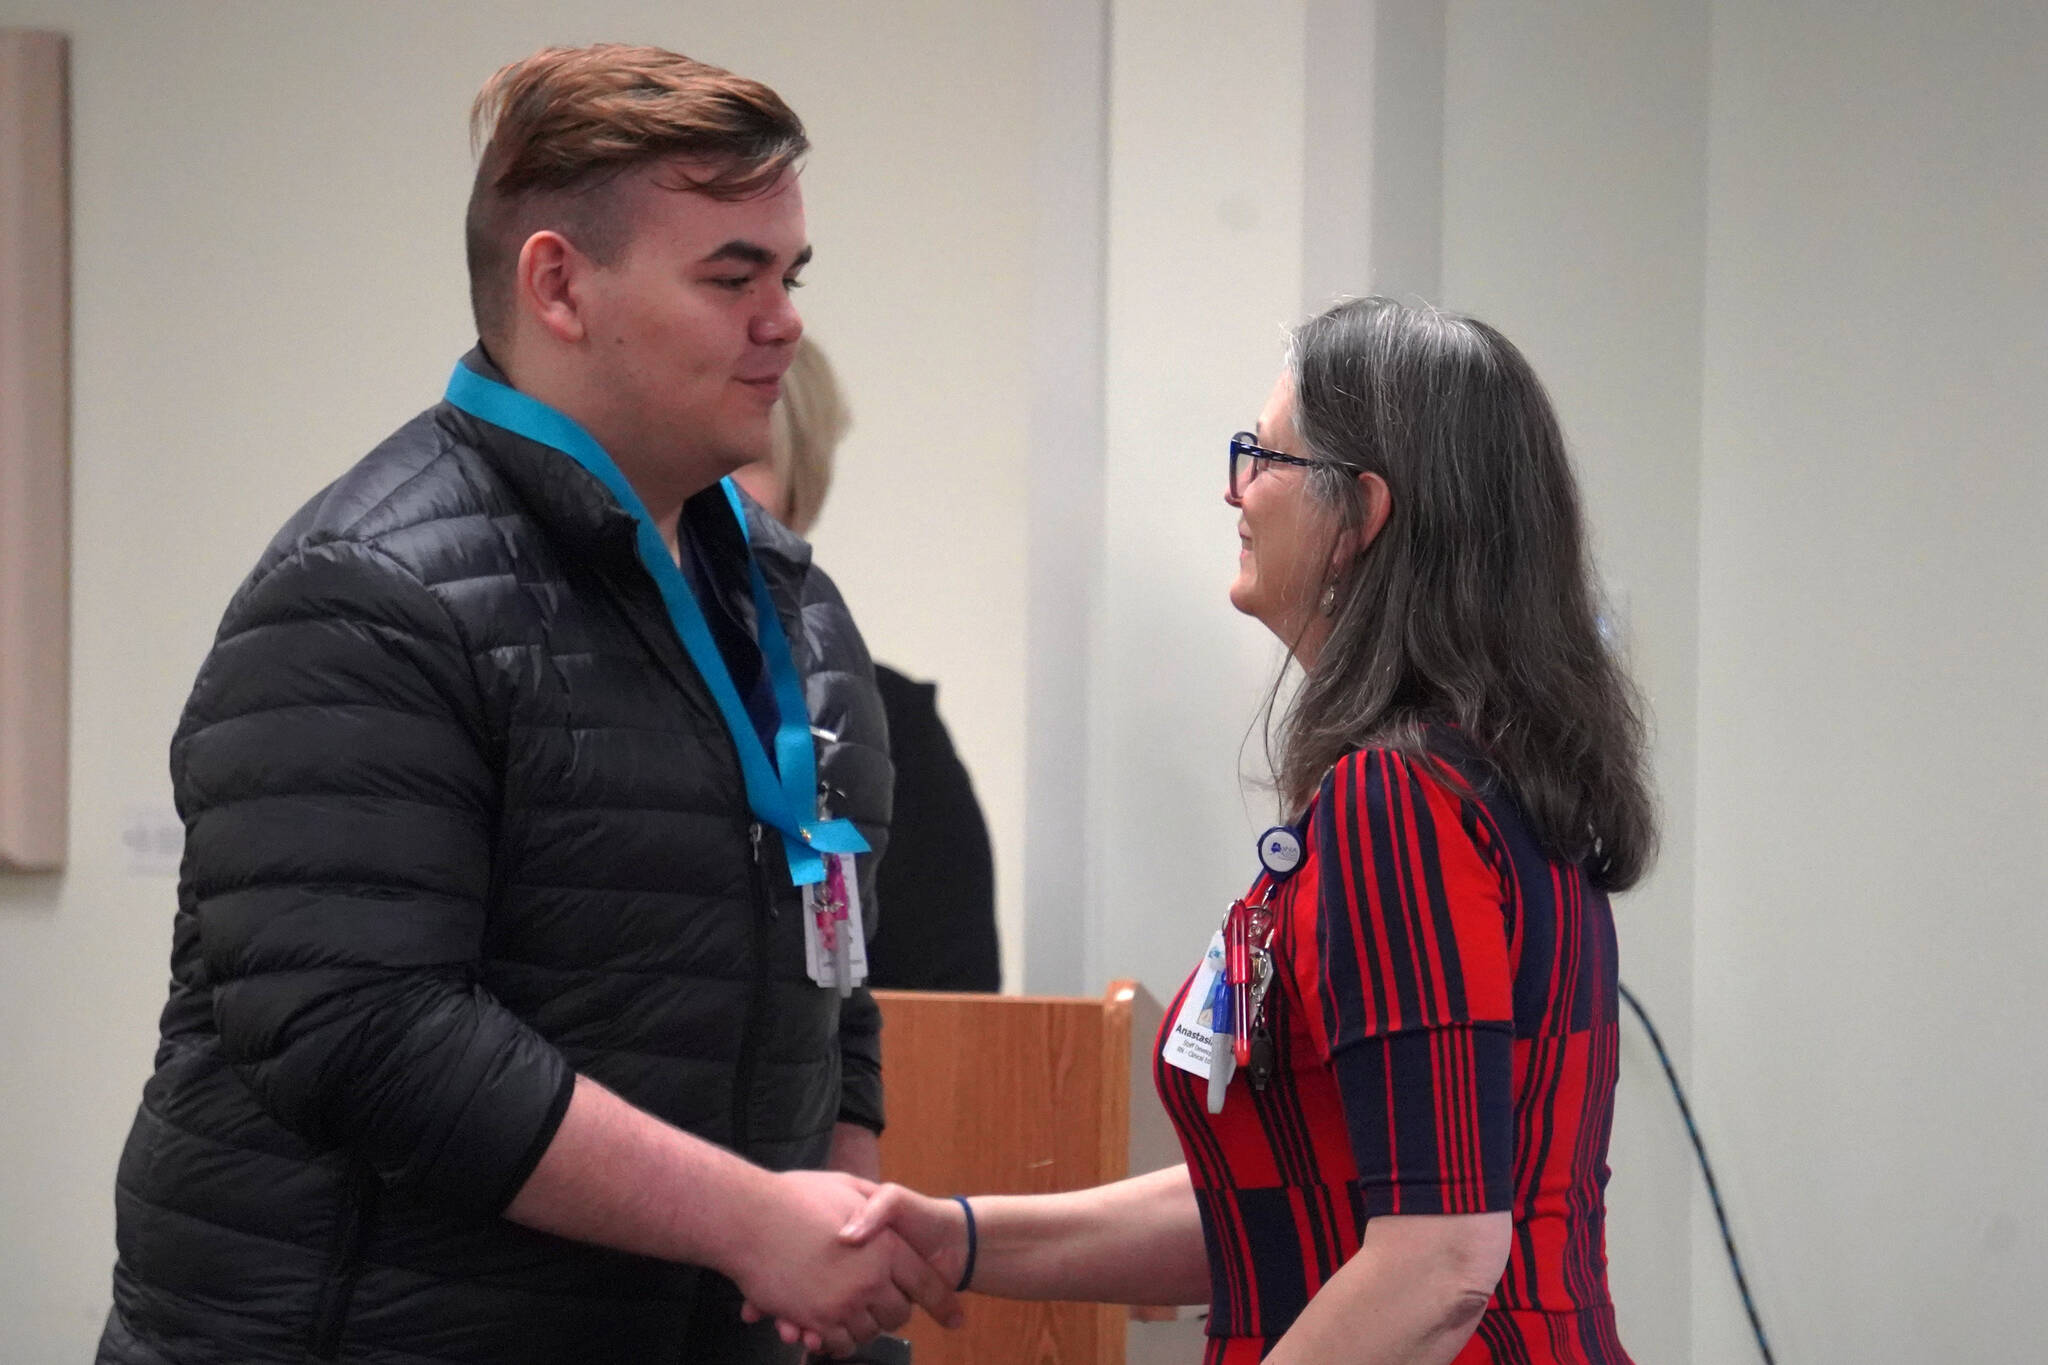 Kenneth Coghill II receives a certified nurse assistant pin from Ana Monyahan at a CNA graduation ceremony at Central Peninsula Hospital in Soldotna, Alaska, on Friday, Aug. 25, 2023. (Jake Dye/Peninsula Clarion)